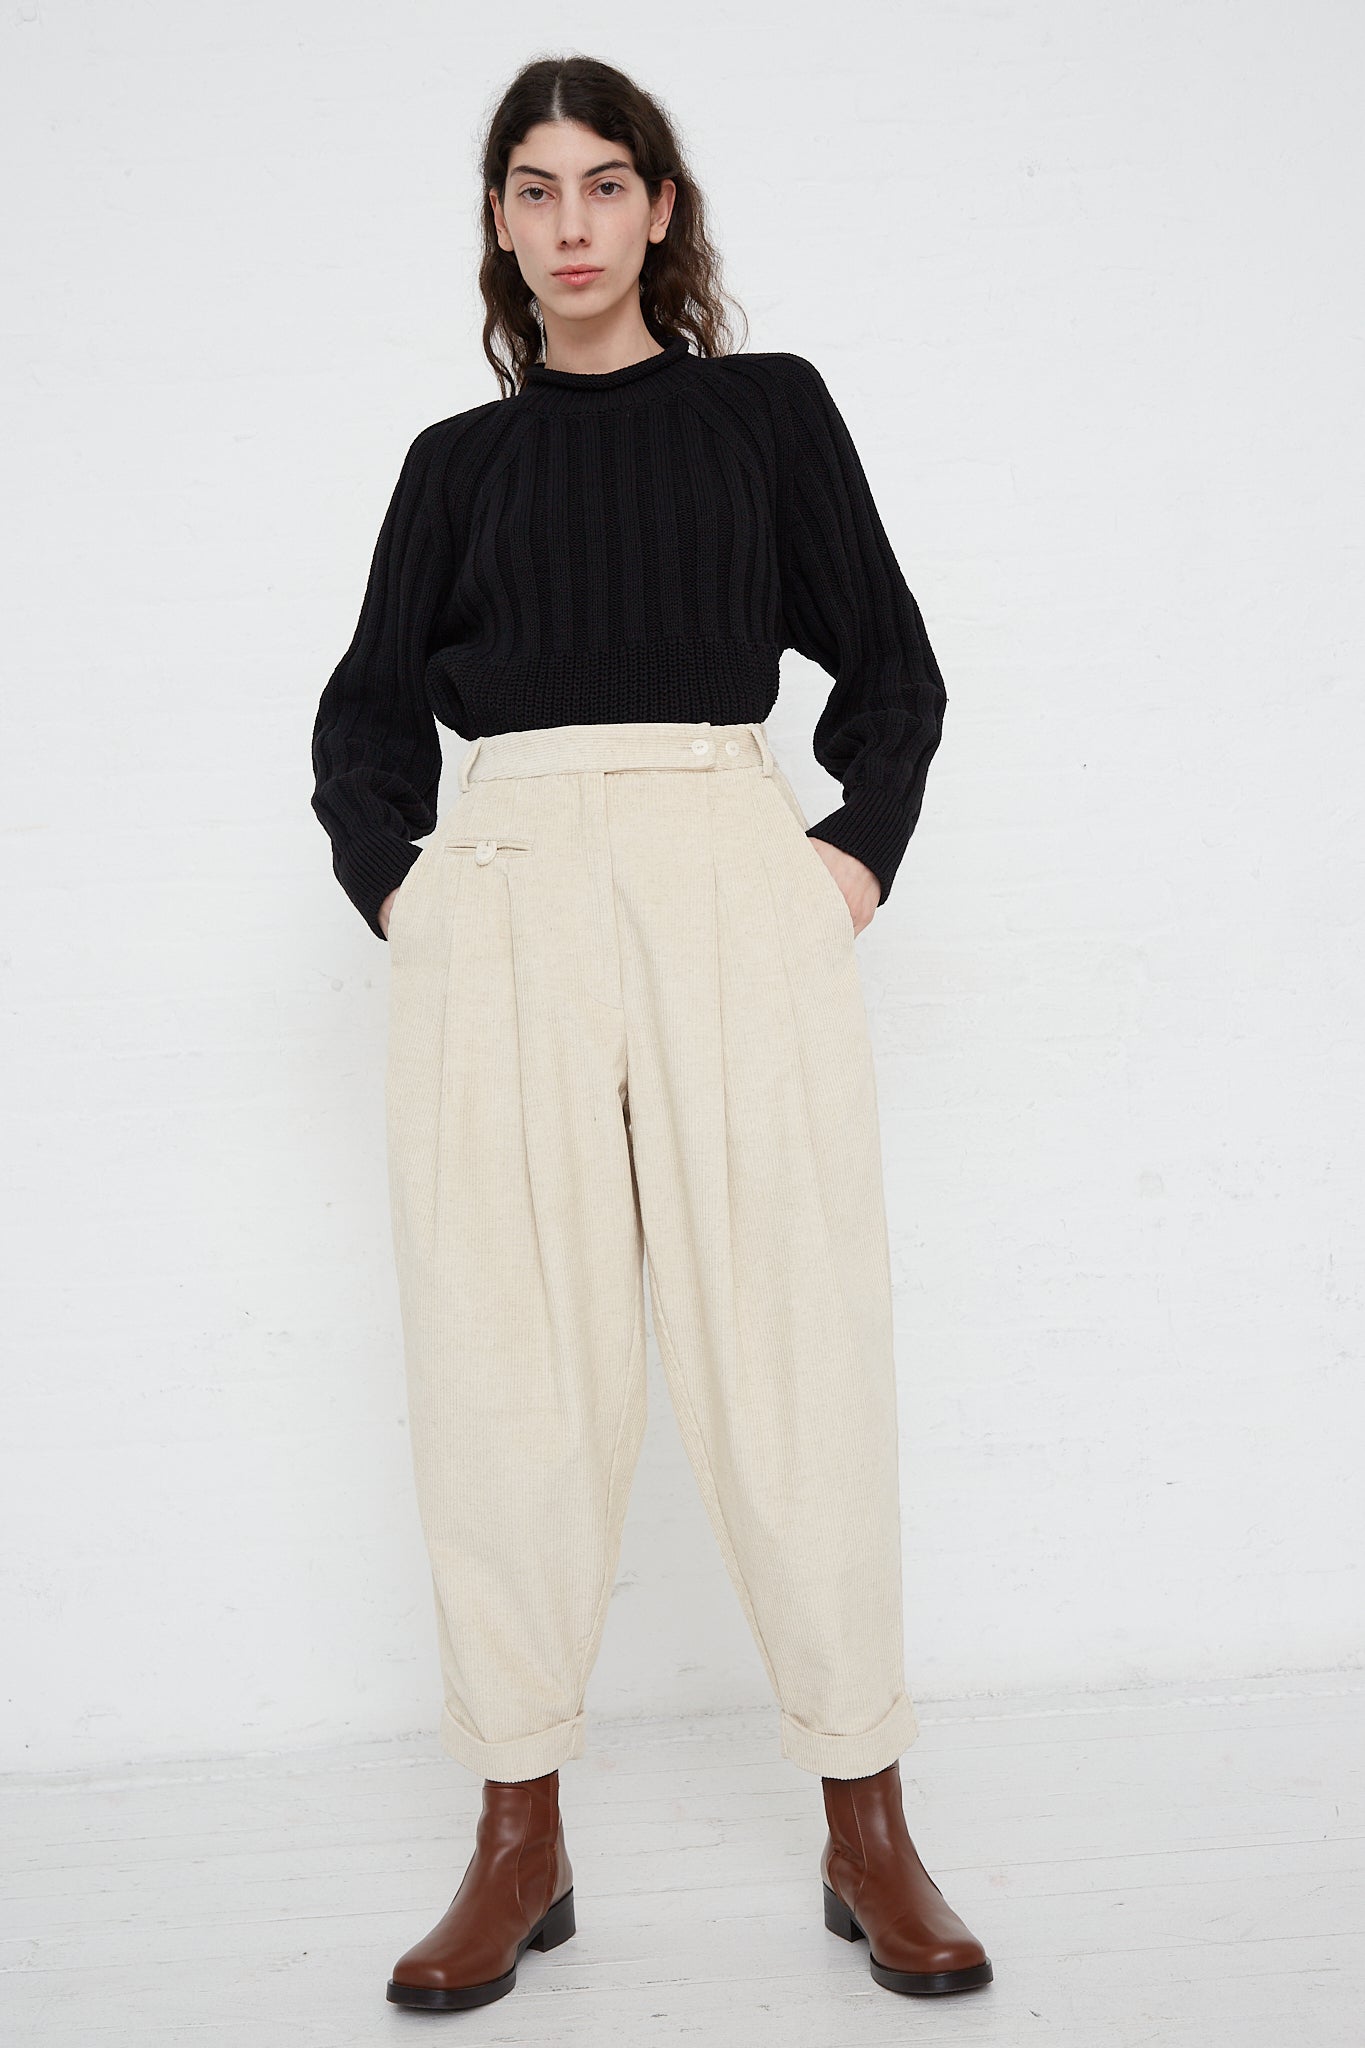 The model is wearing a black sweater and beige trousers made by Cordera. Front view. Full length.